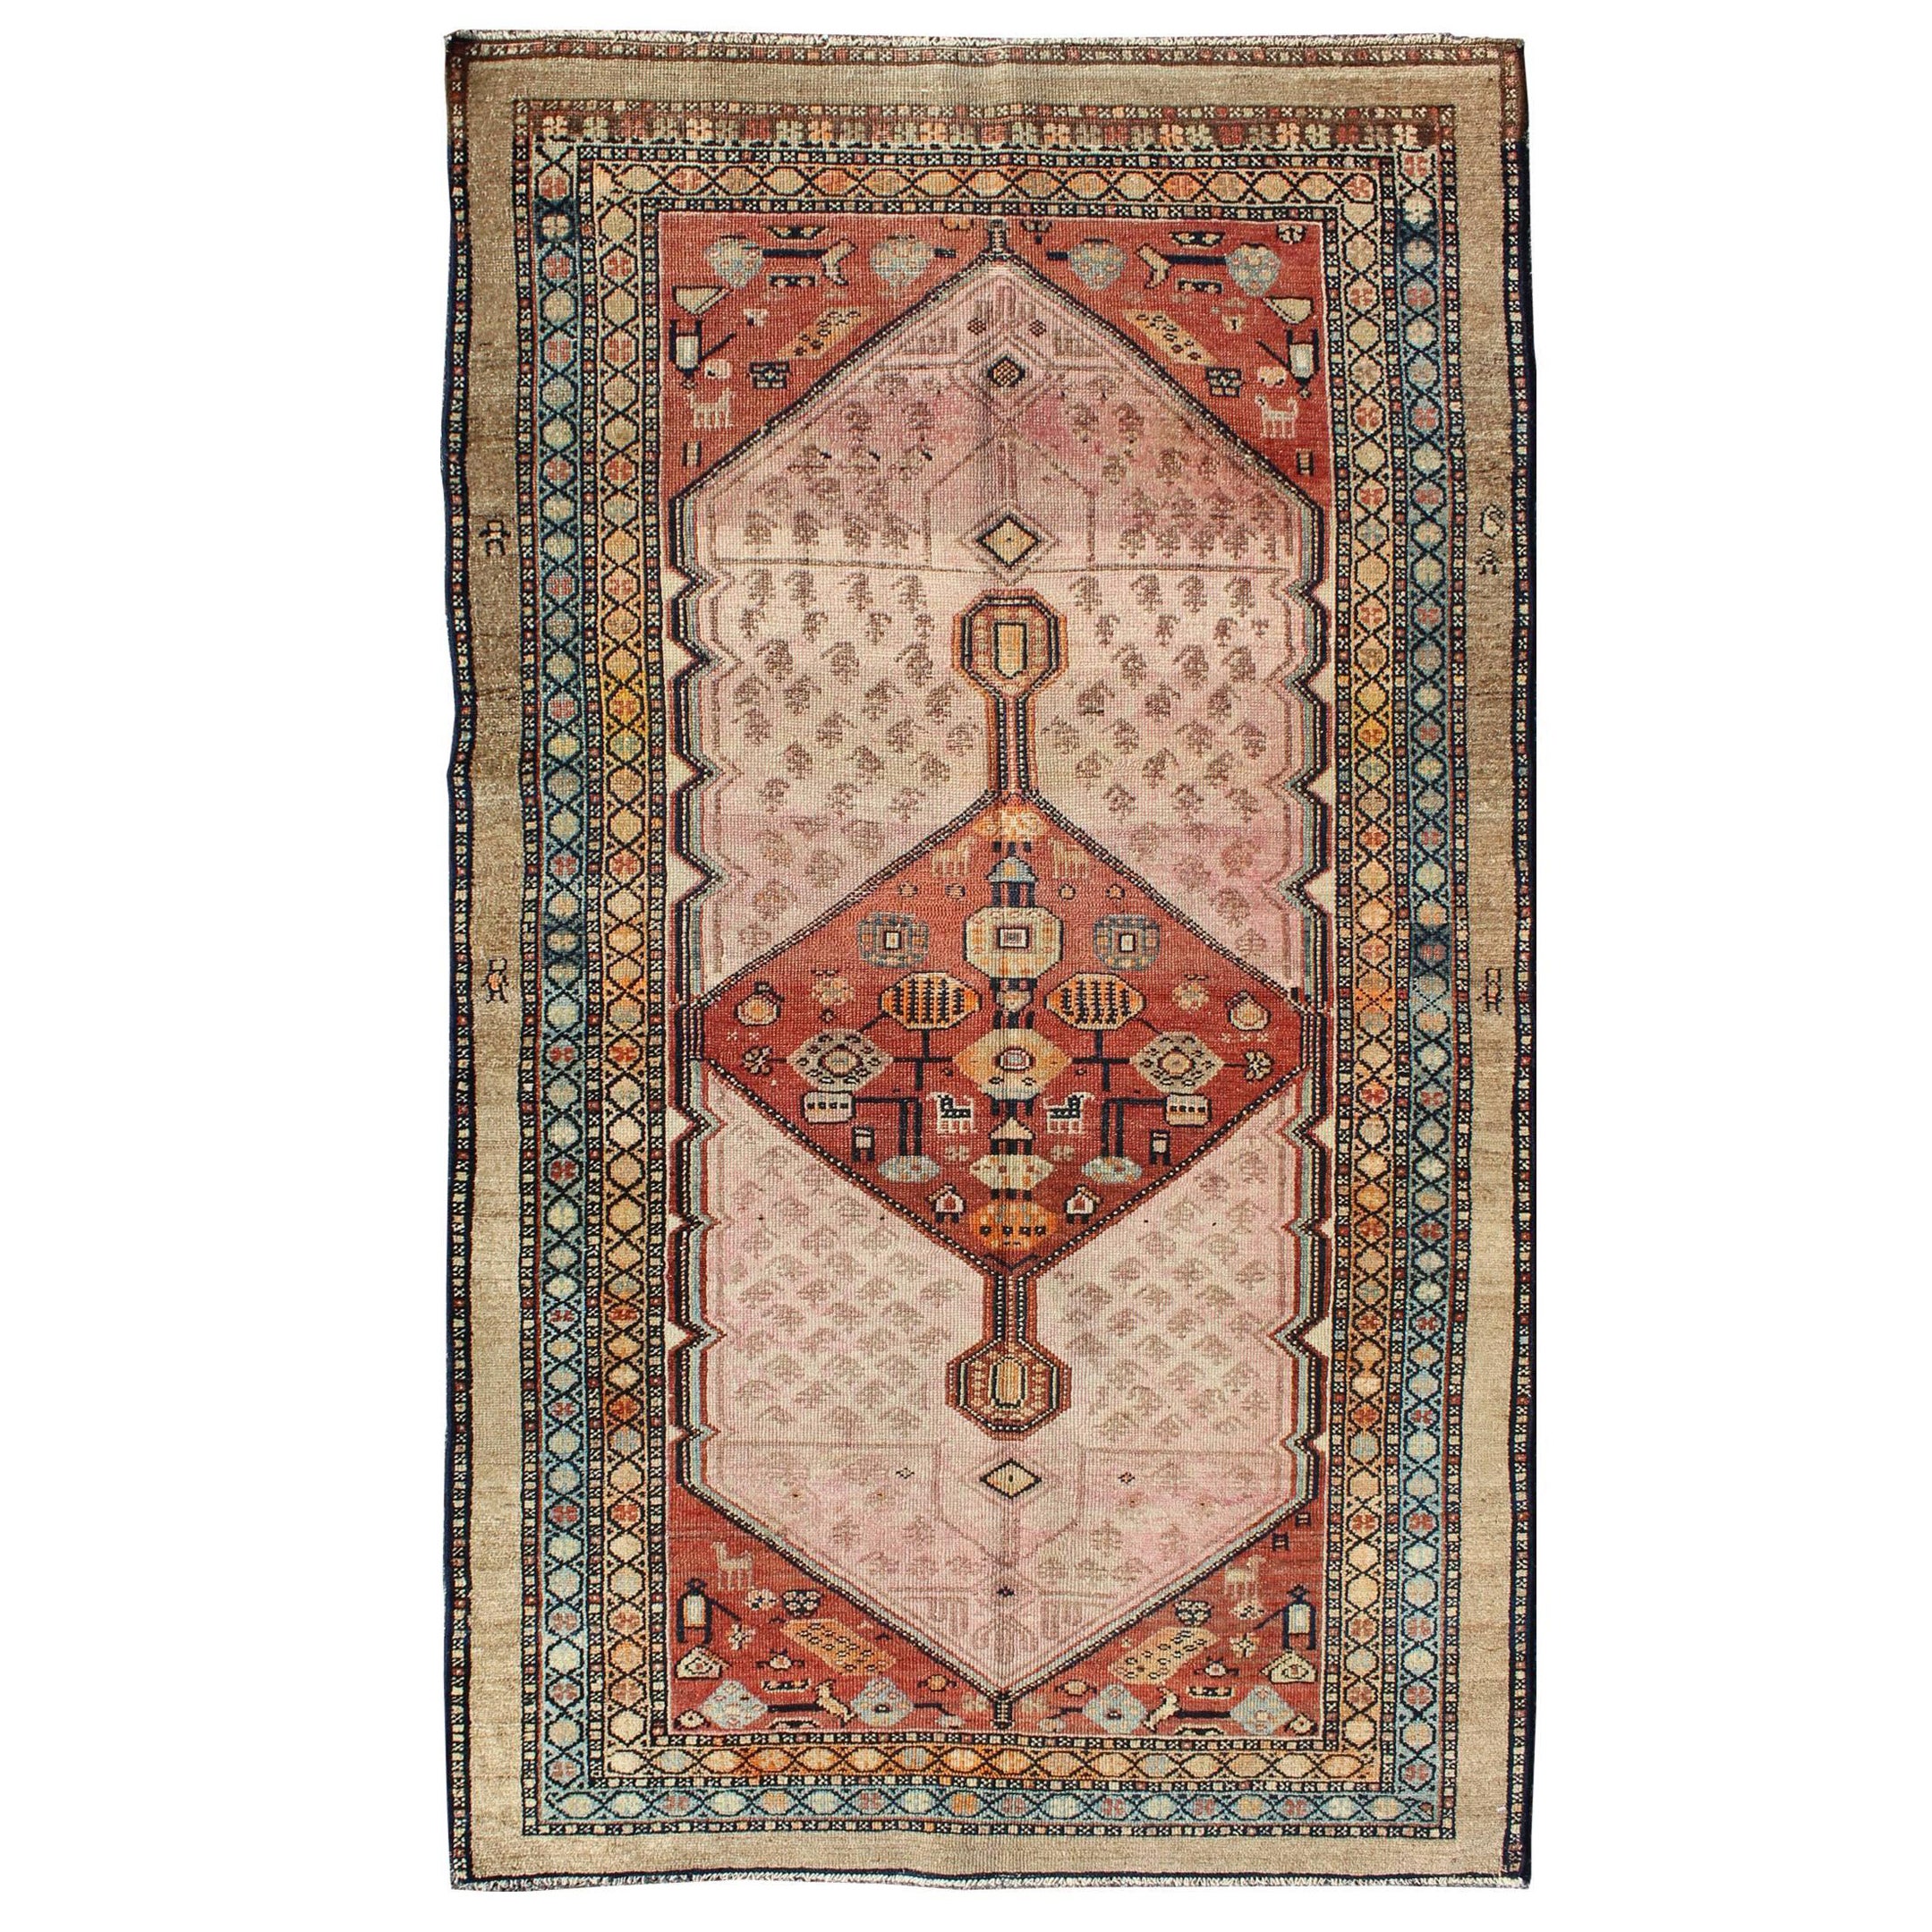 Antique Persian Serab Rug with Geometric Medallion Design in Tan and Pink